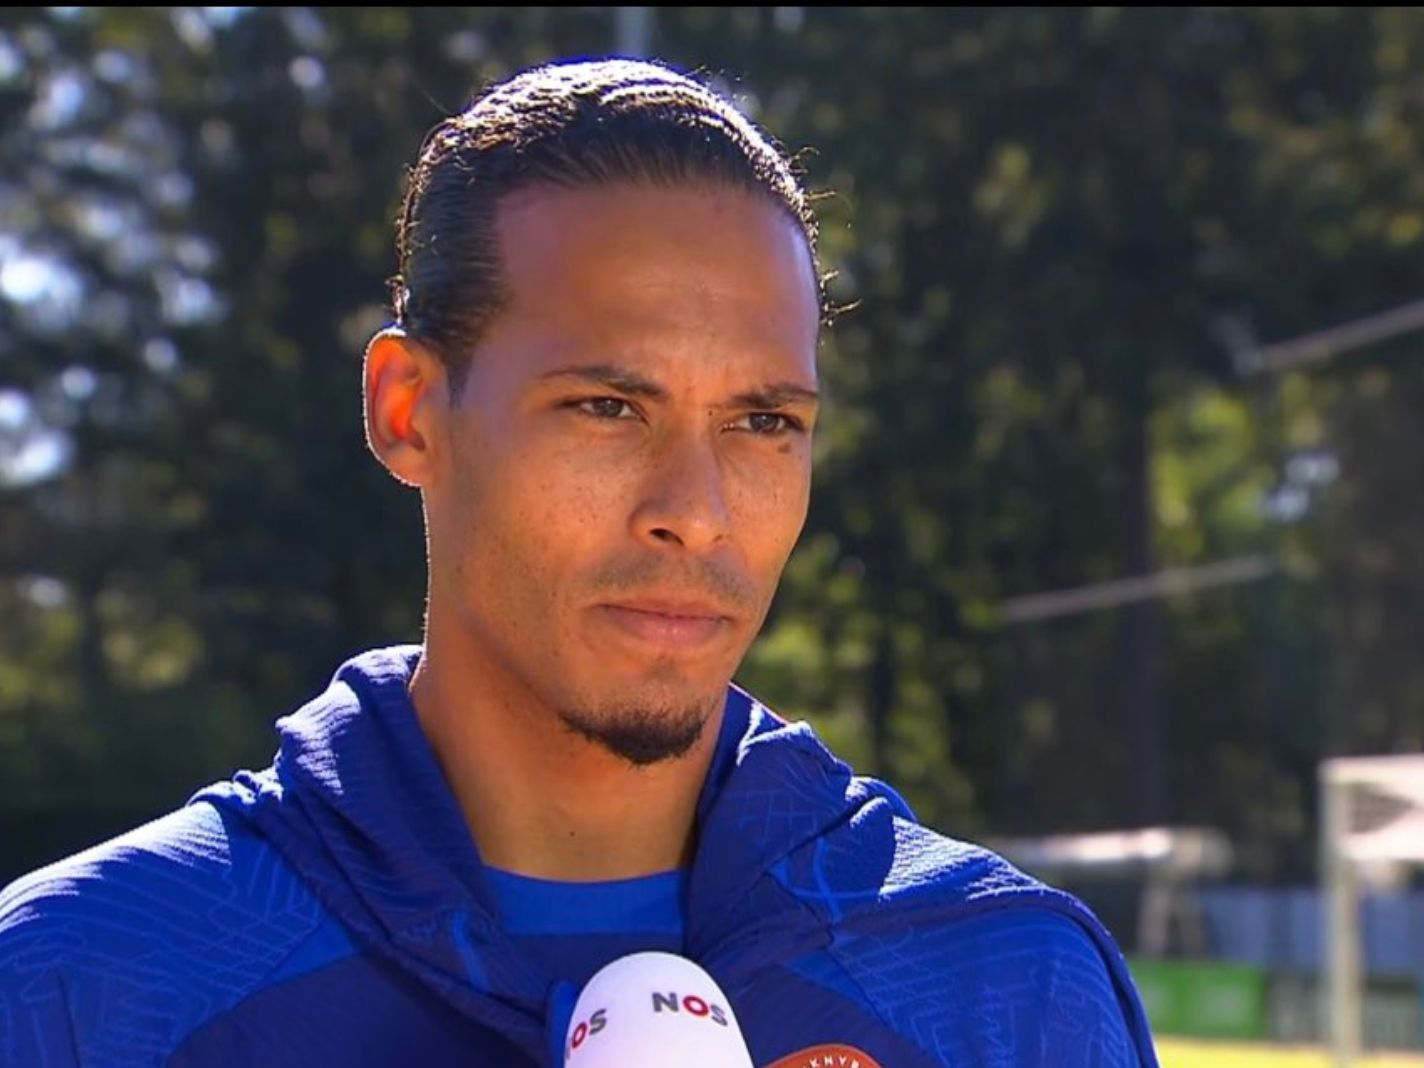 Van Dijk Rejects Van Gaal’s Theory of a Rigged World Cup: ‘Bodied His Own Coach’